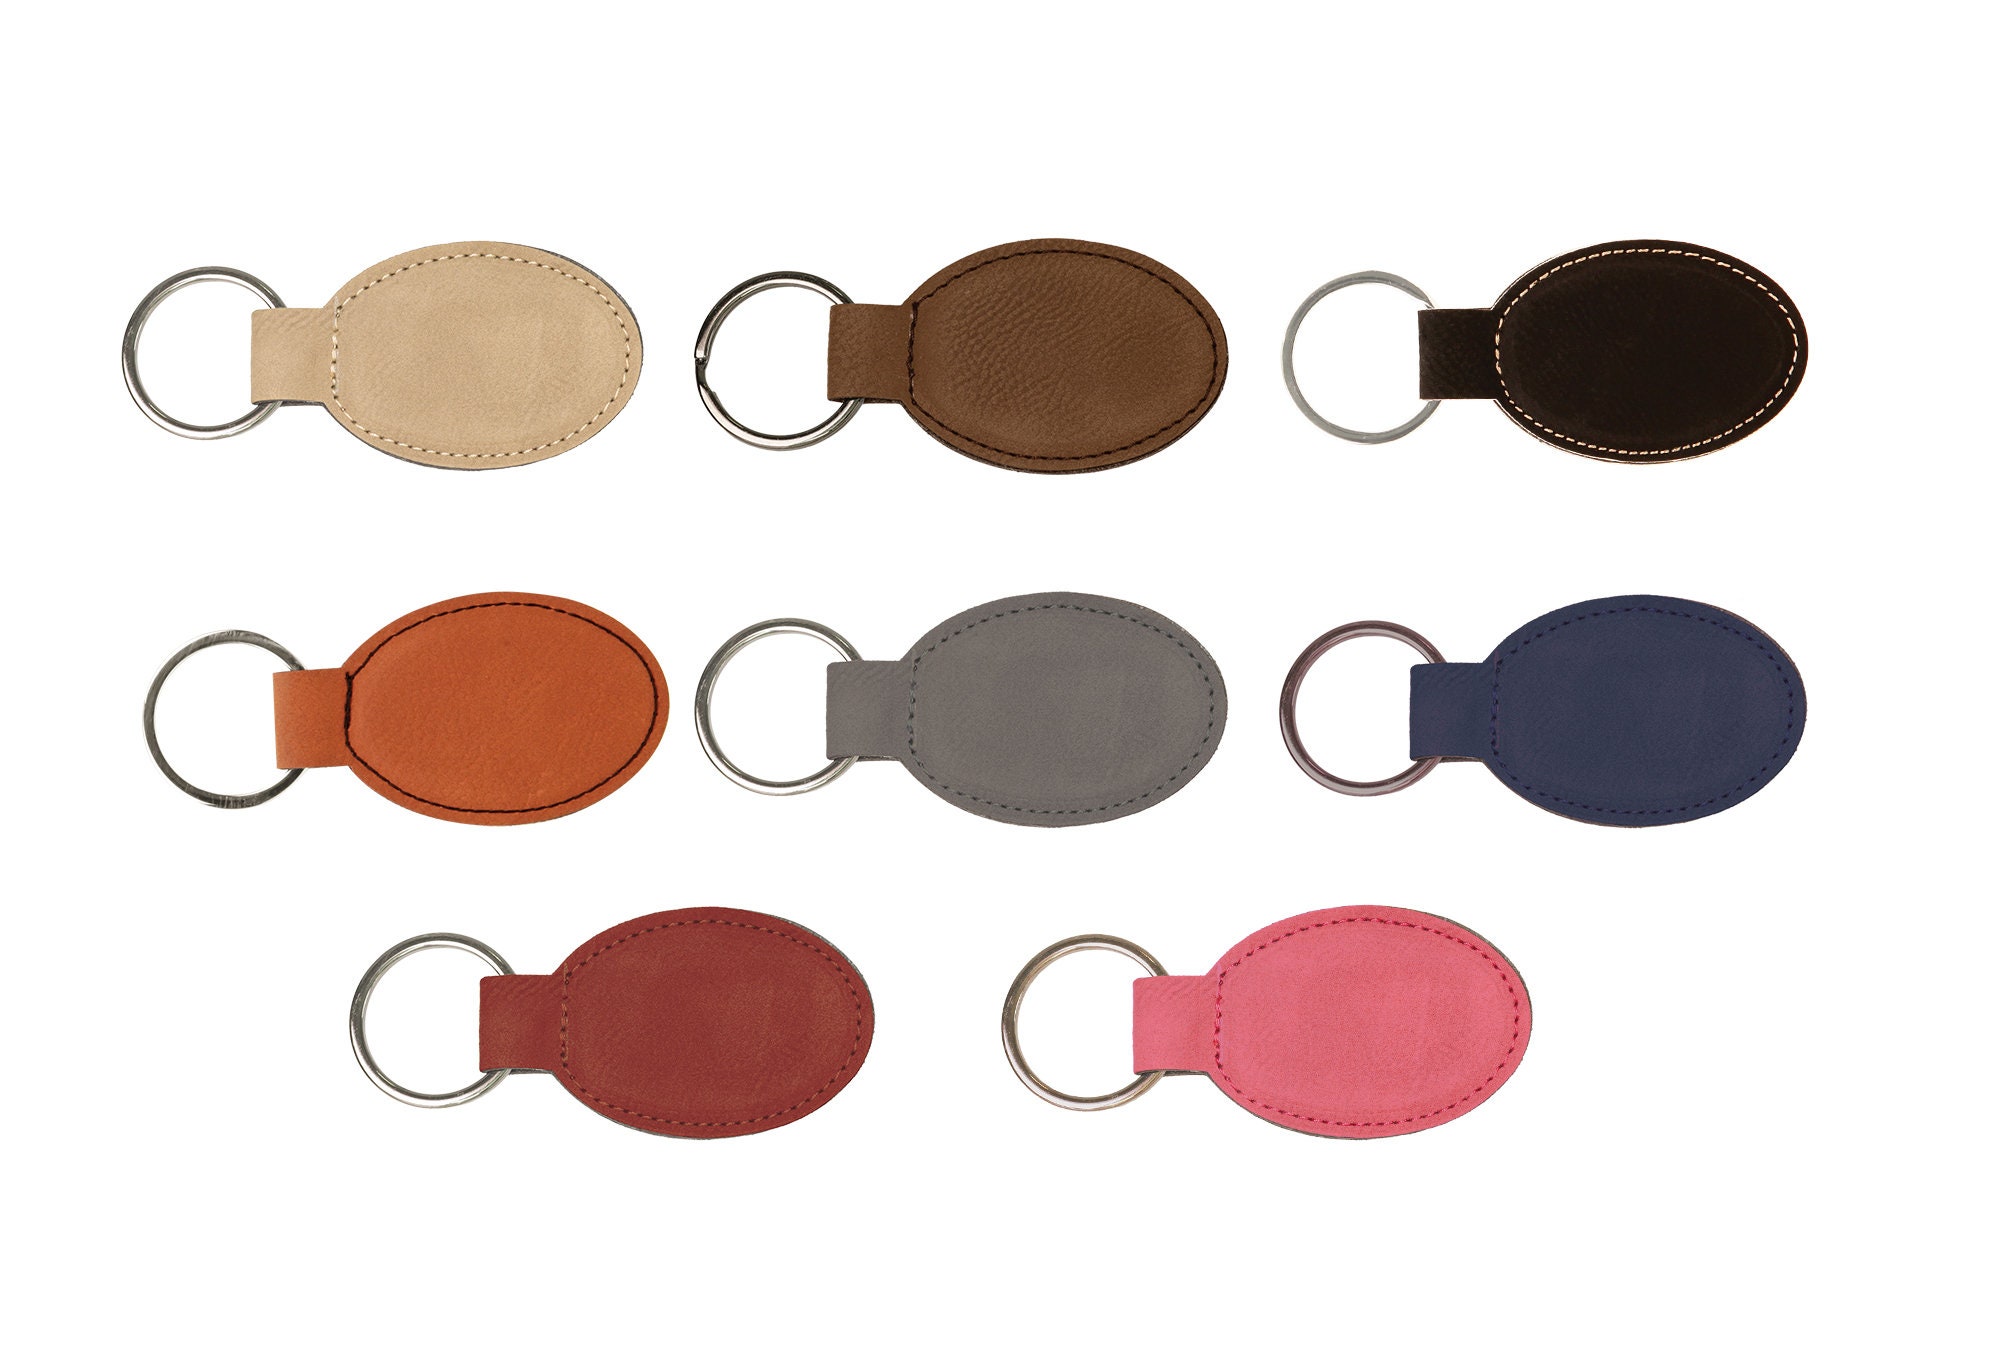 Leatherette Keychain ID Holder – Traditions Engraving